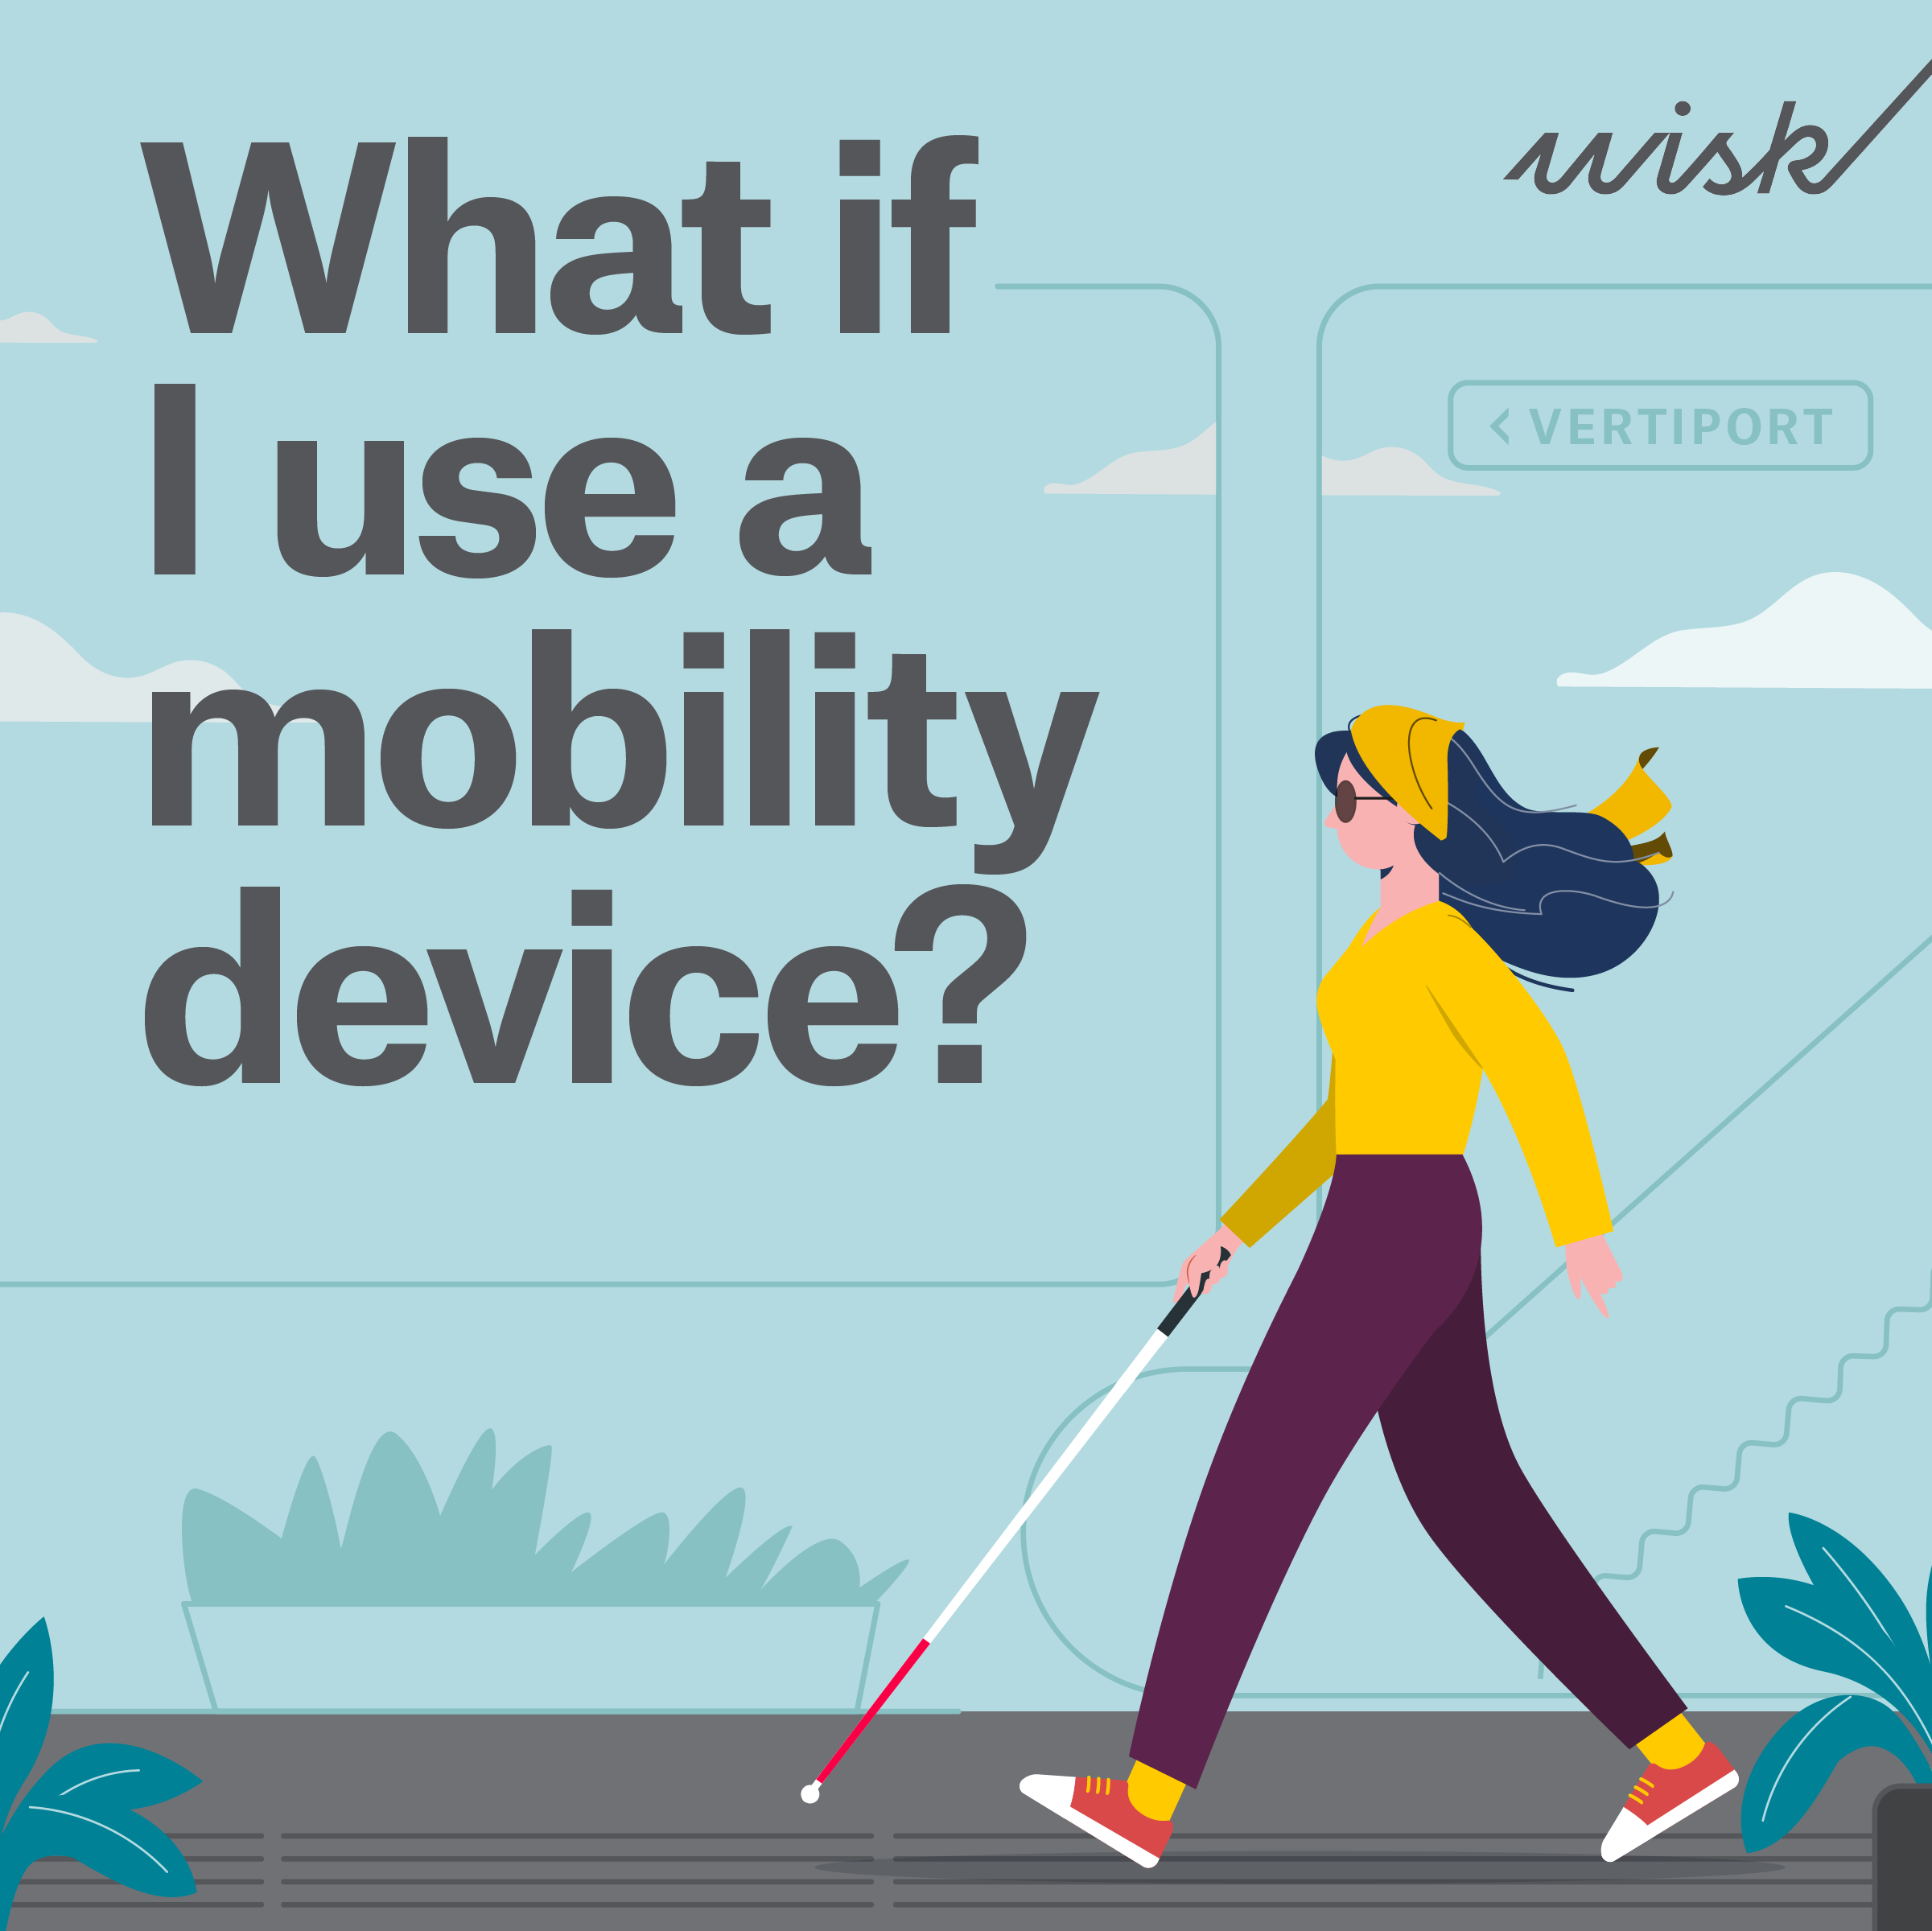 FAQ - What if I use a mobility device?